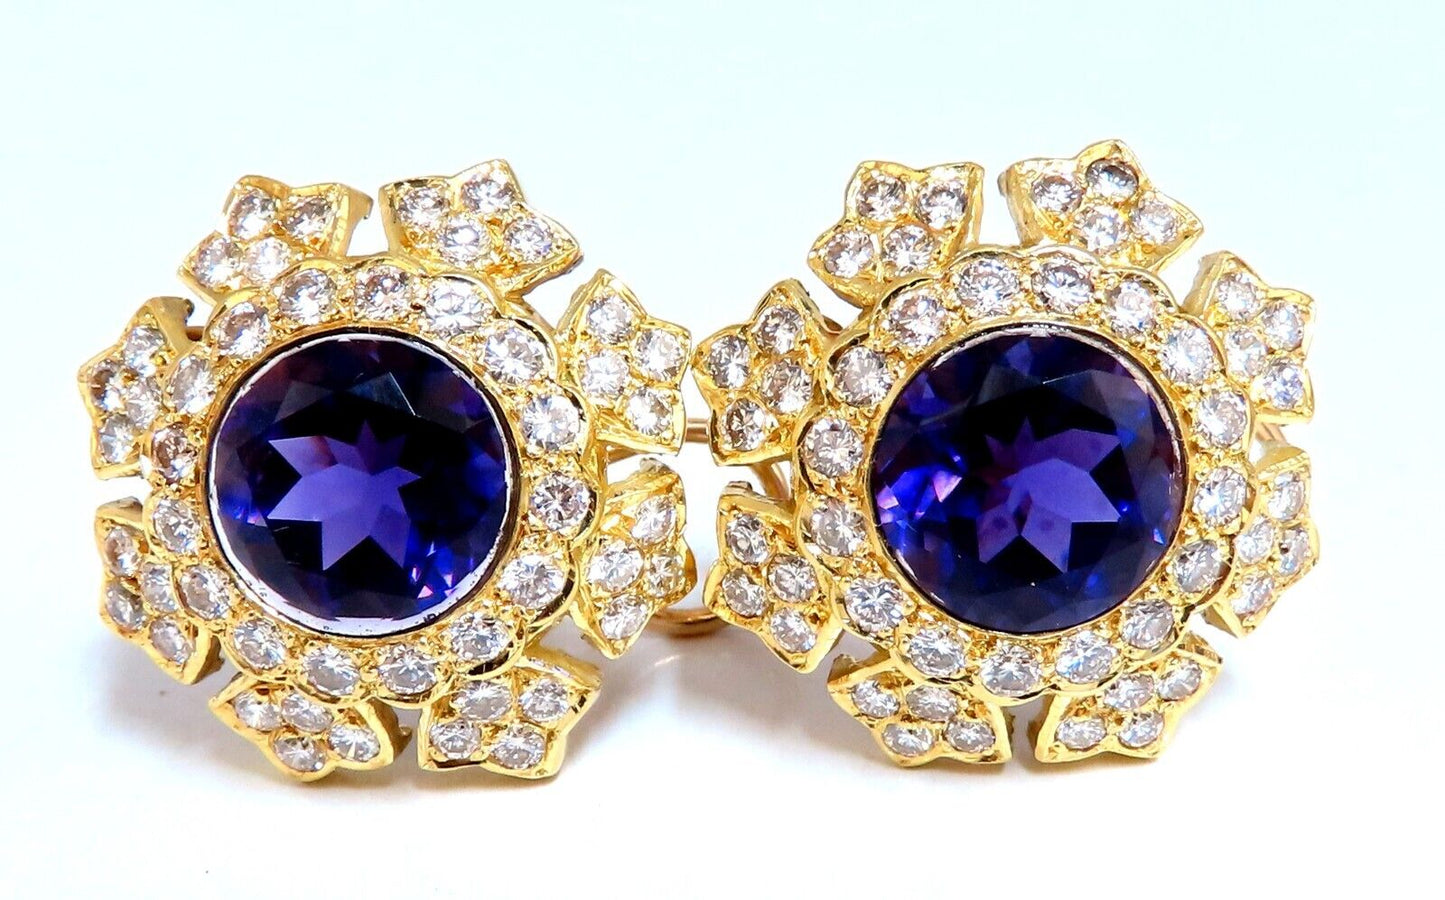 23.50ct Natural Round Bright Purple Diamond Clip Earrings 18kt